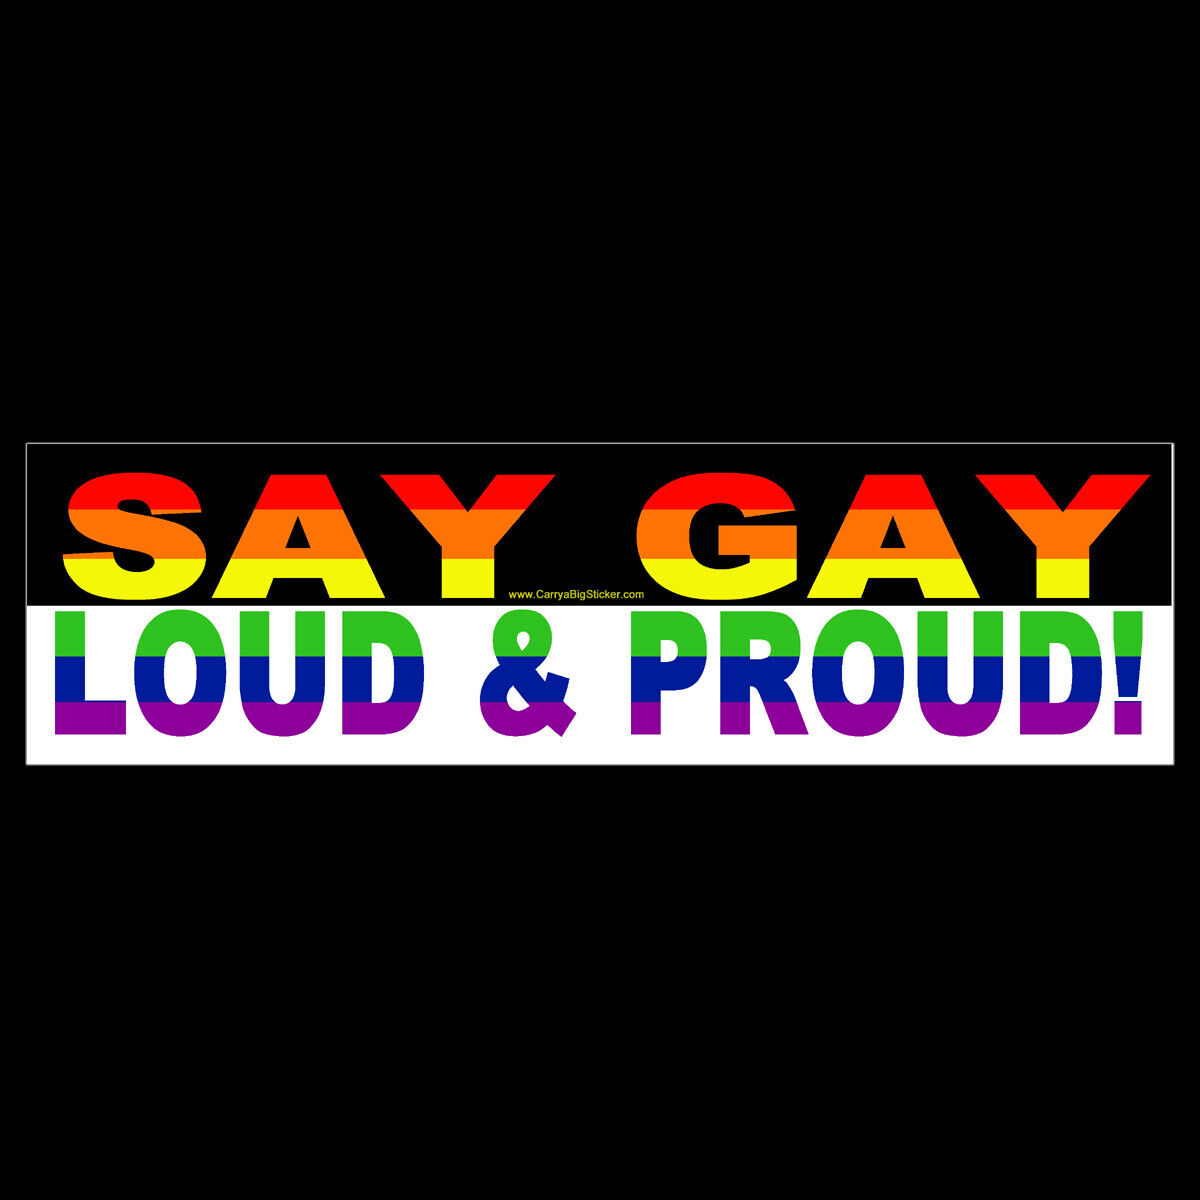 Say Gay Loud and Proud BUMPER STICKER or MAGNET magnetic decal LGBTQ gay pride